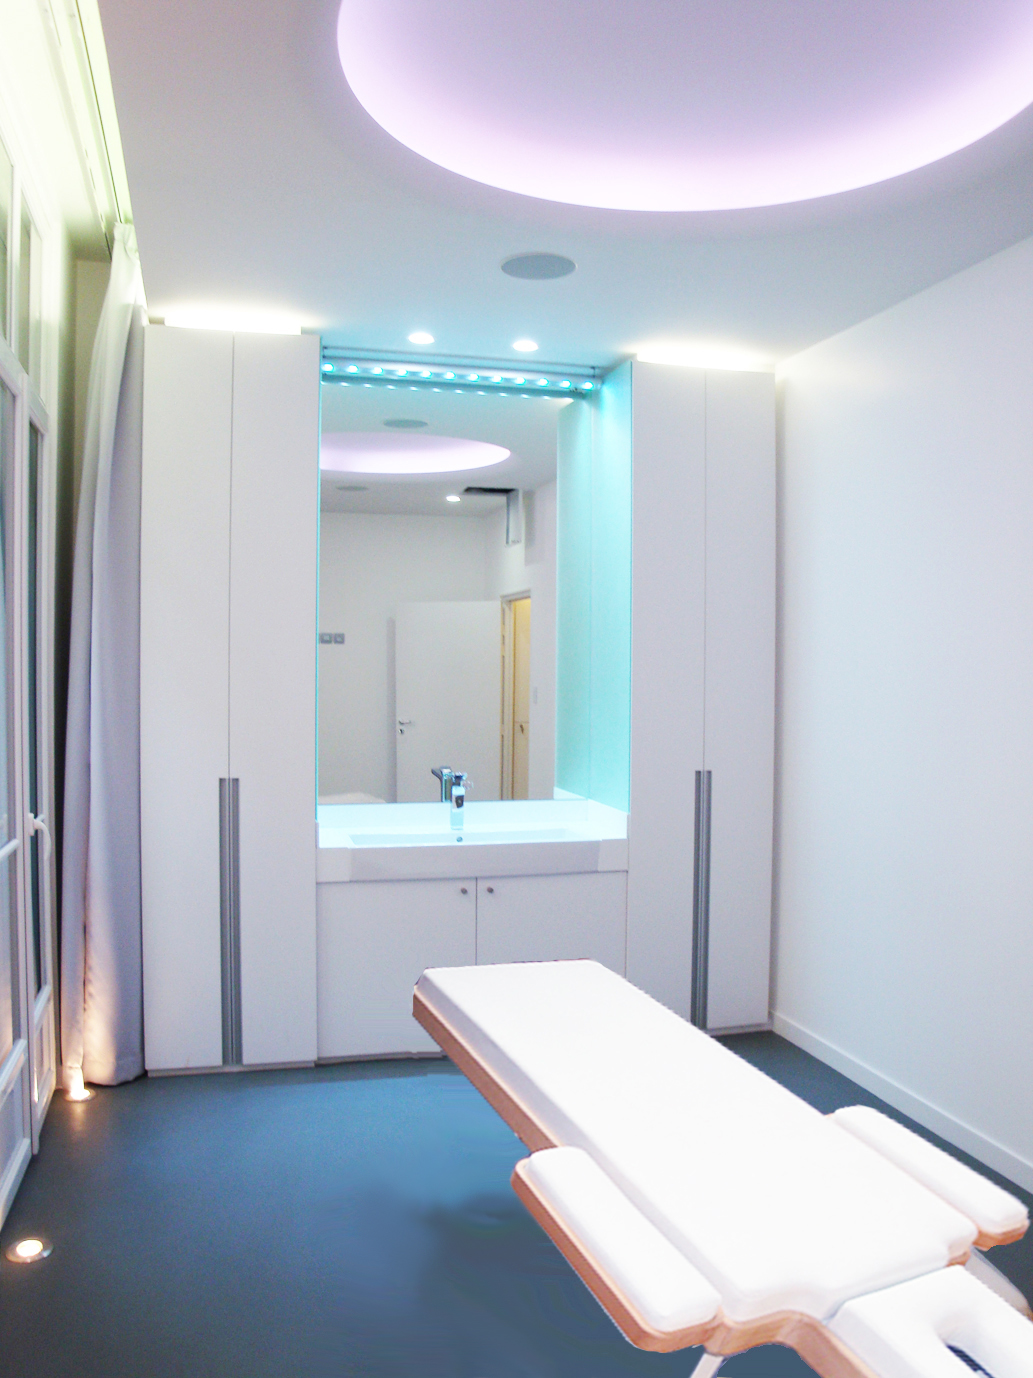 Wellness wellbeing clinic design Interior architecture product